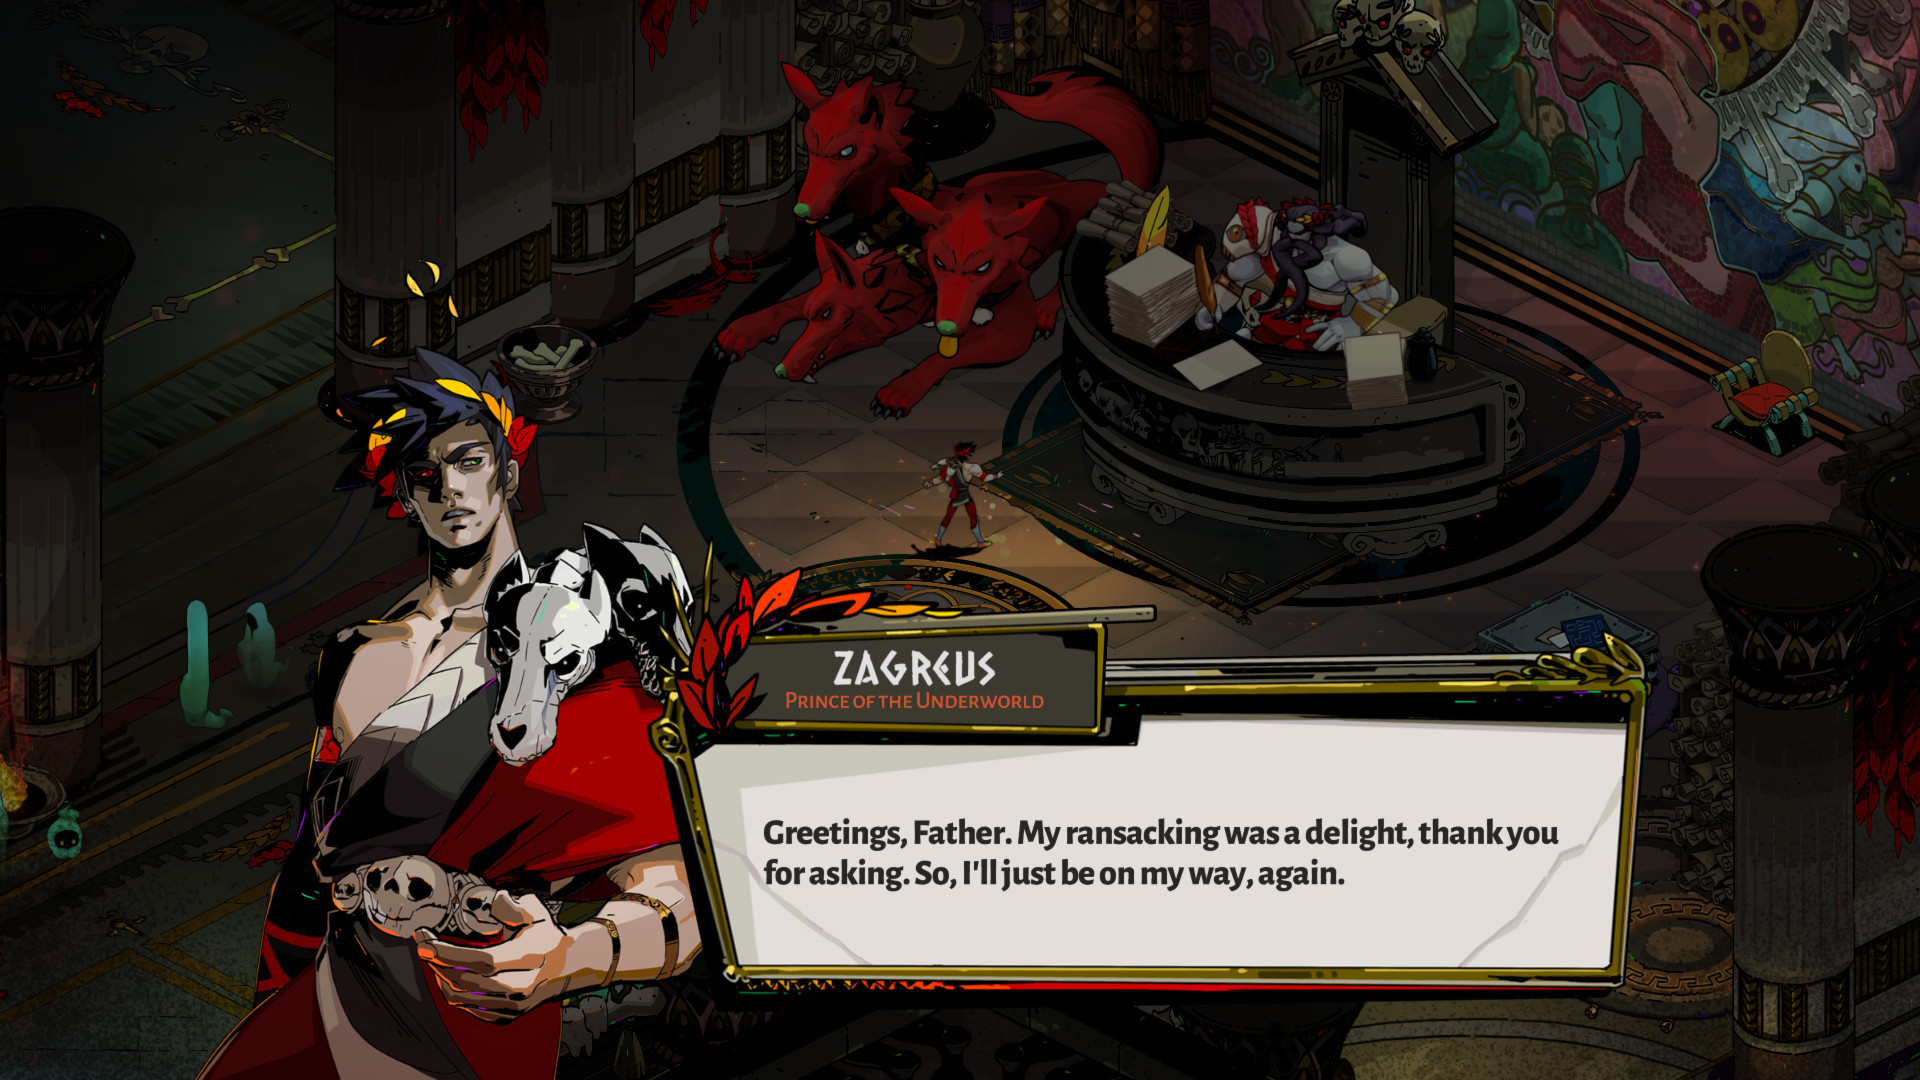 Zagreus sassing his father.